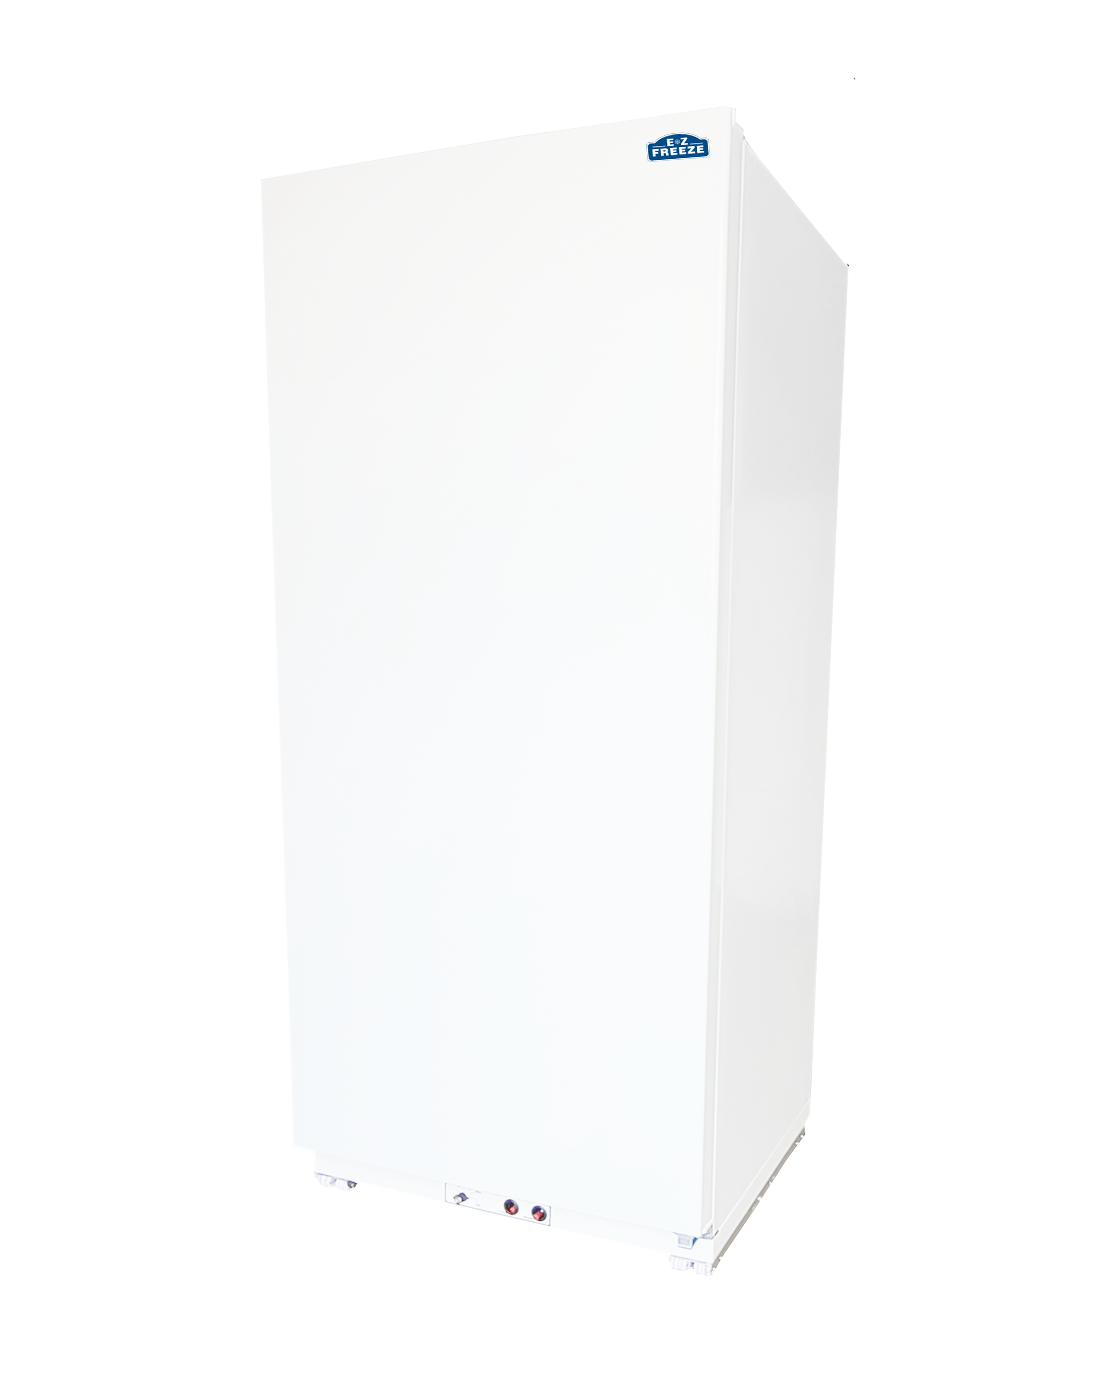 EZ Freeze Propane Refrigerator EZ Freeze EZ-21RNG 21 cu. ft. Natural Gas All-Refrigerator (No Freezer Section) in White - Call for Availability